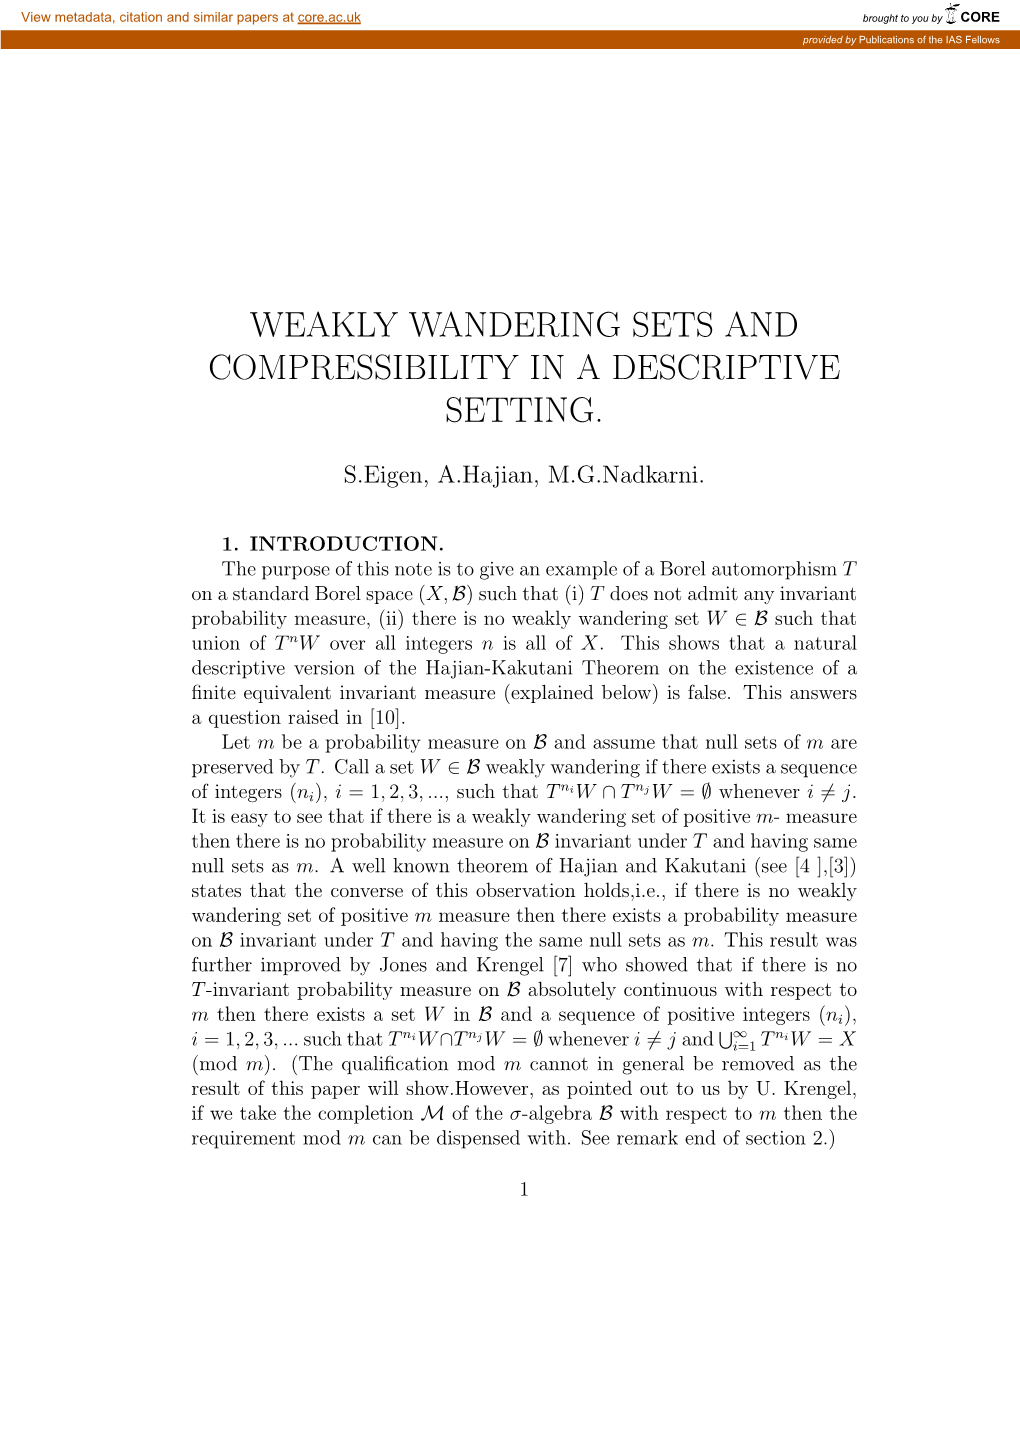 Weakly Wandering Sets and Compressibility in a Descriptive Setting